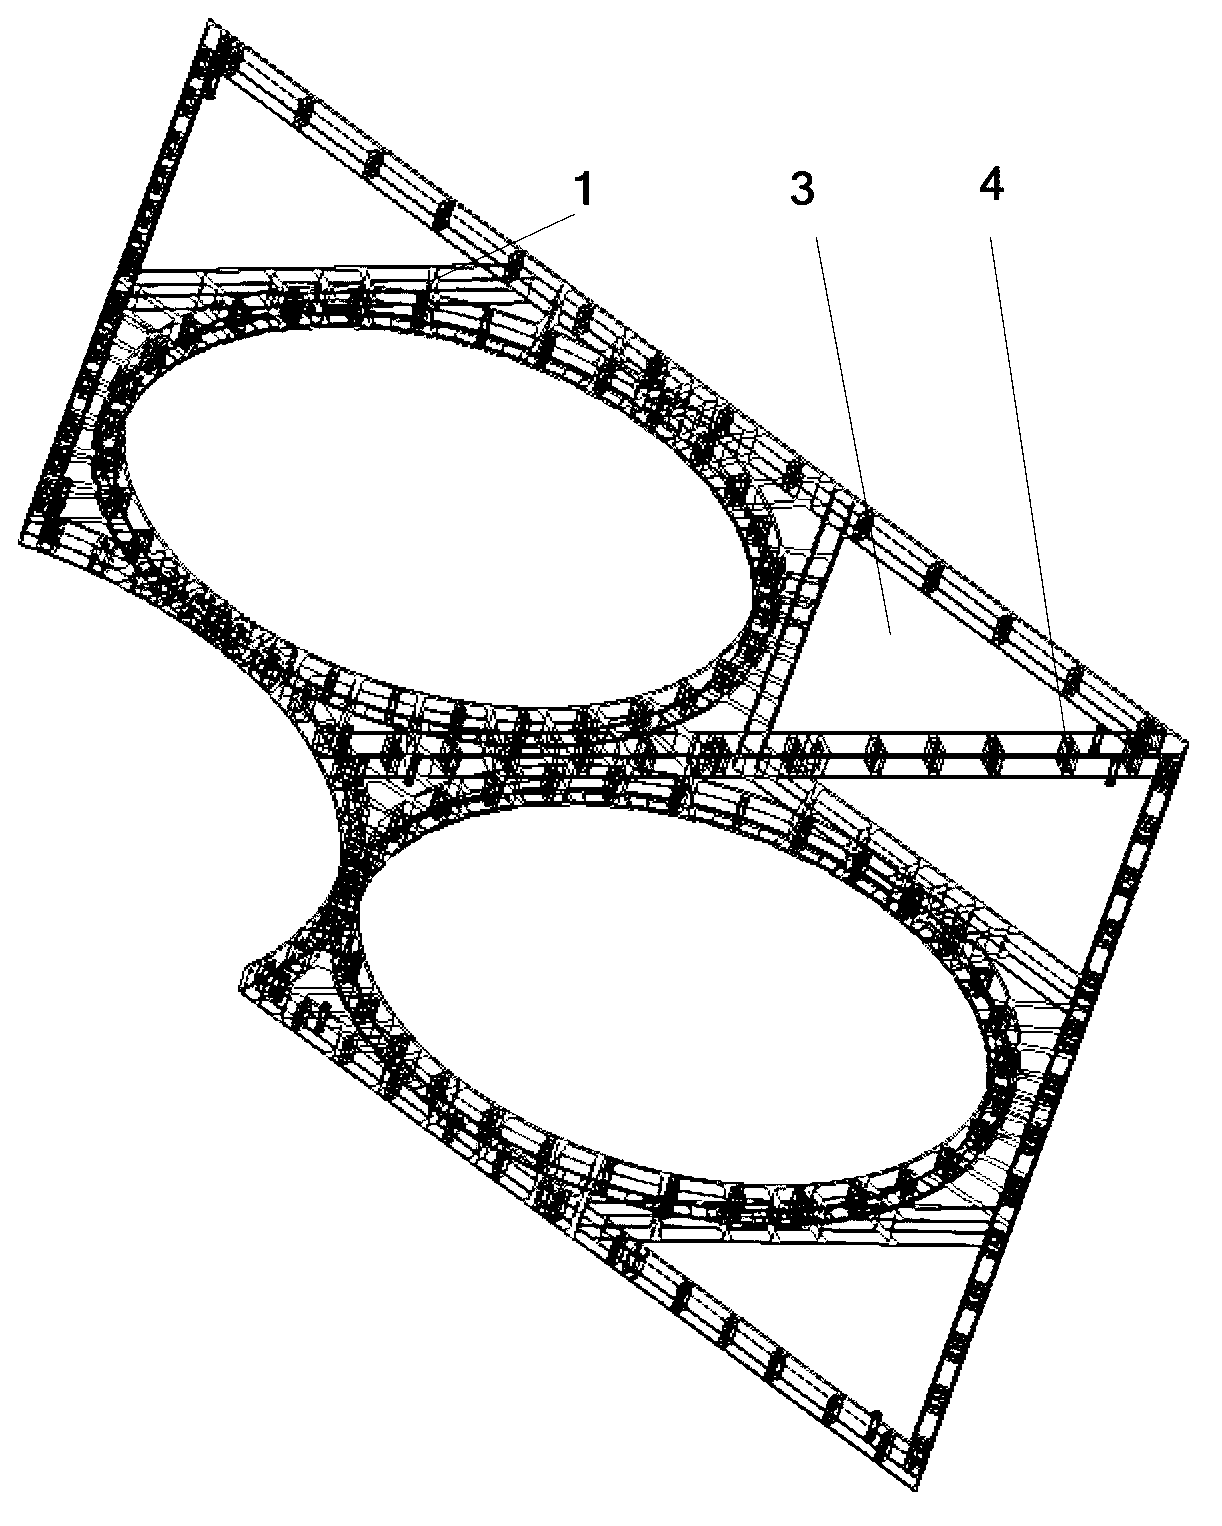 High-carrying-capacity embedded frame composite material structural slab